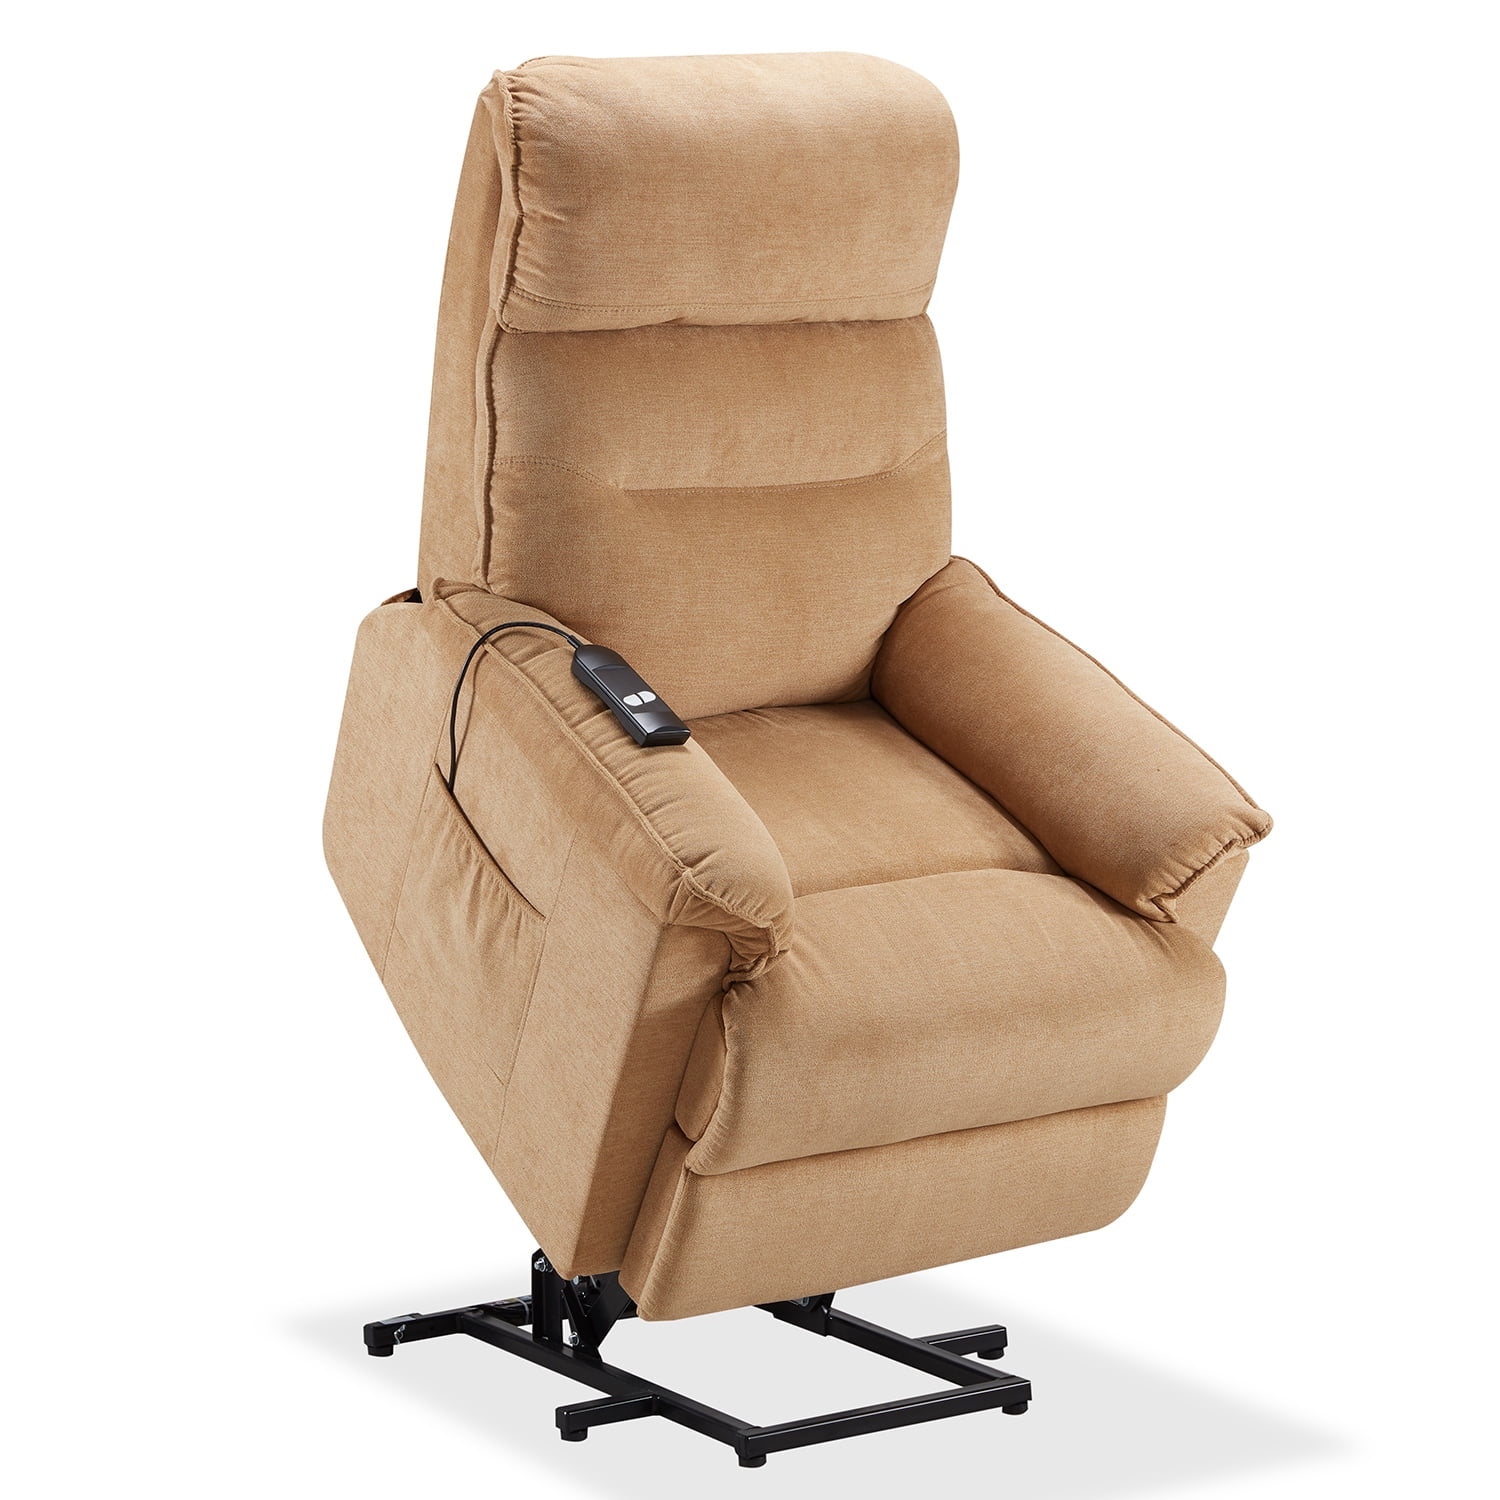 Power Lift Massage Chair On Clearance Btmway Living Room Bedroom Recliner Chairs For Elderly Singla Sofa Reading Lounge Chair Modern Theater Seating Reclining Chair With 10 Massage Mode Yellow R600 Walmart Com Walmart Com